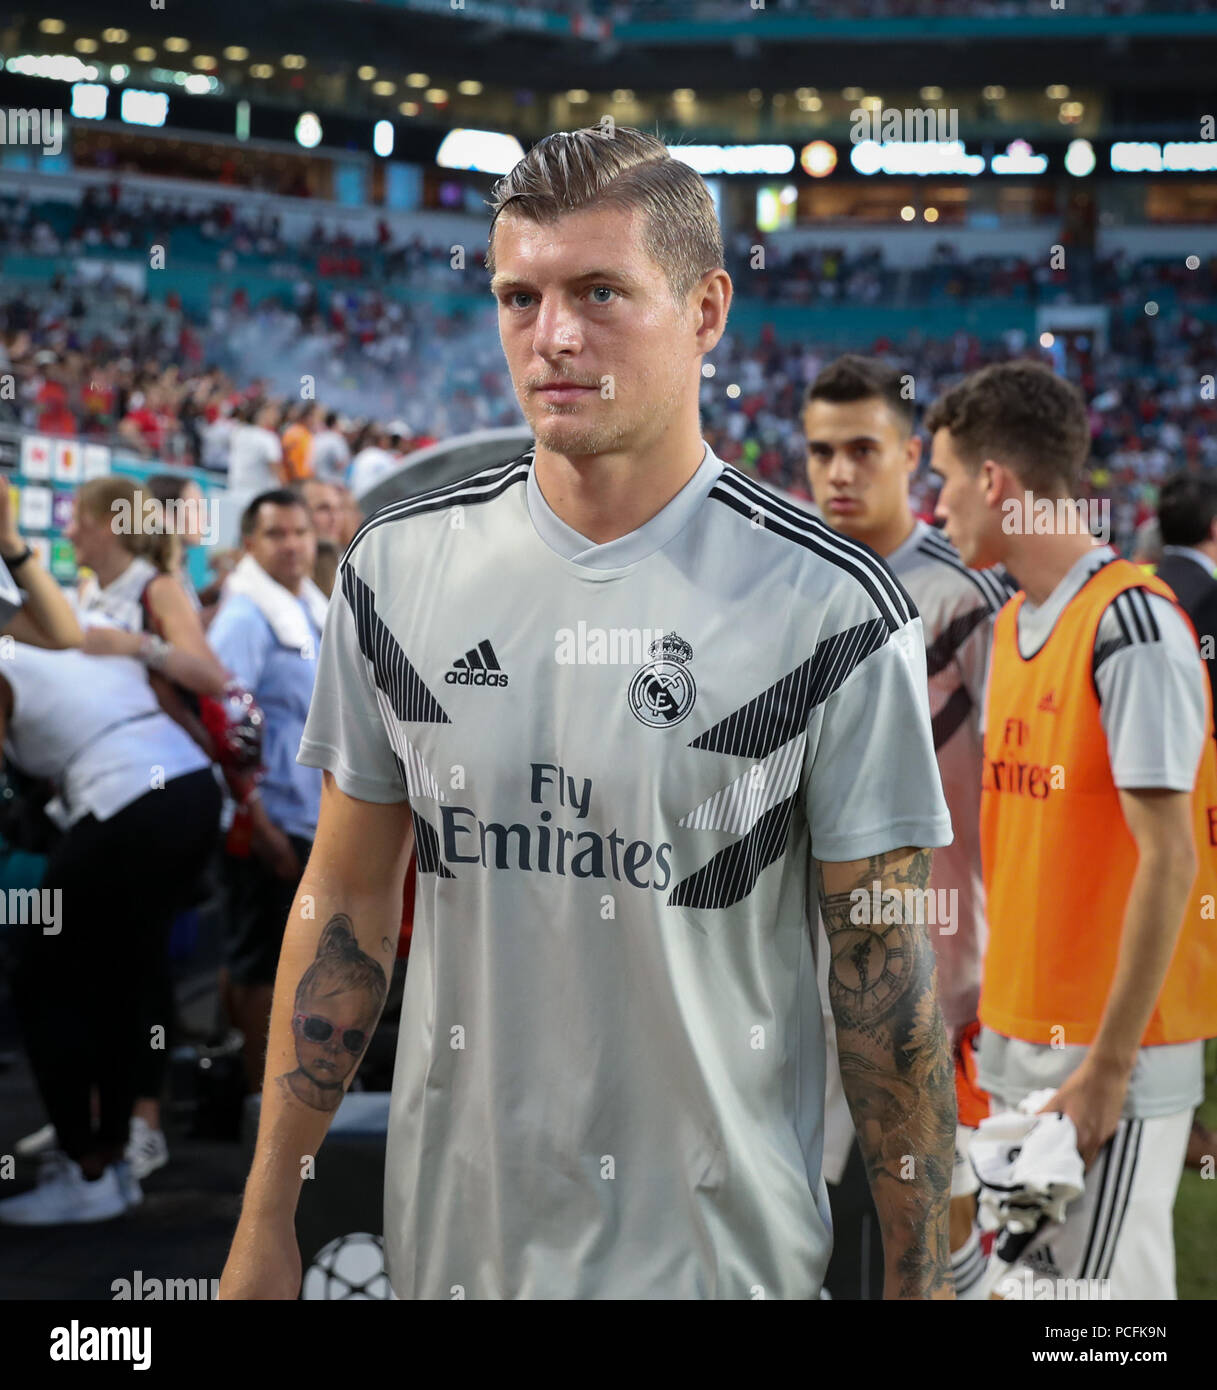 Miami Gardens, Florida, USA. 31st July, 2018. Real Madrid C.F. midfielder  Toni Kroos (8) enters the field at the start of an International Champions  Cup match between Real Madrid C.F. and Manchester